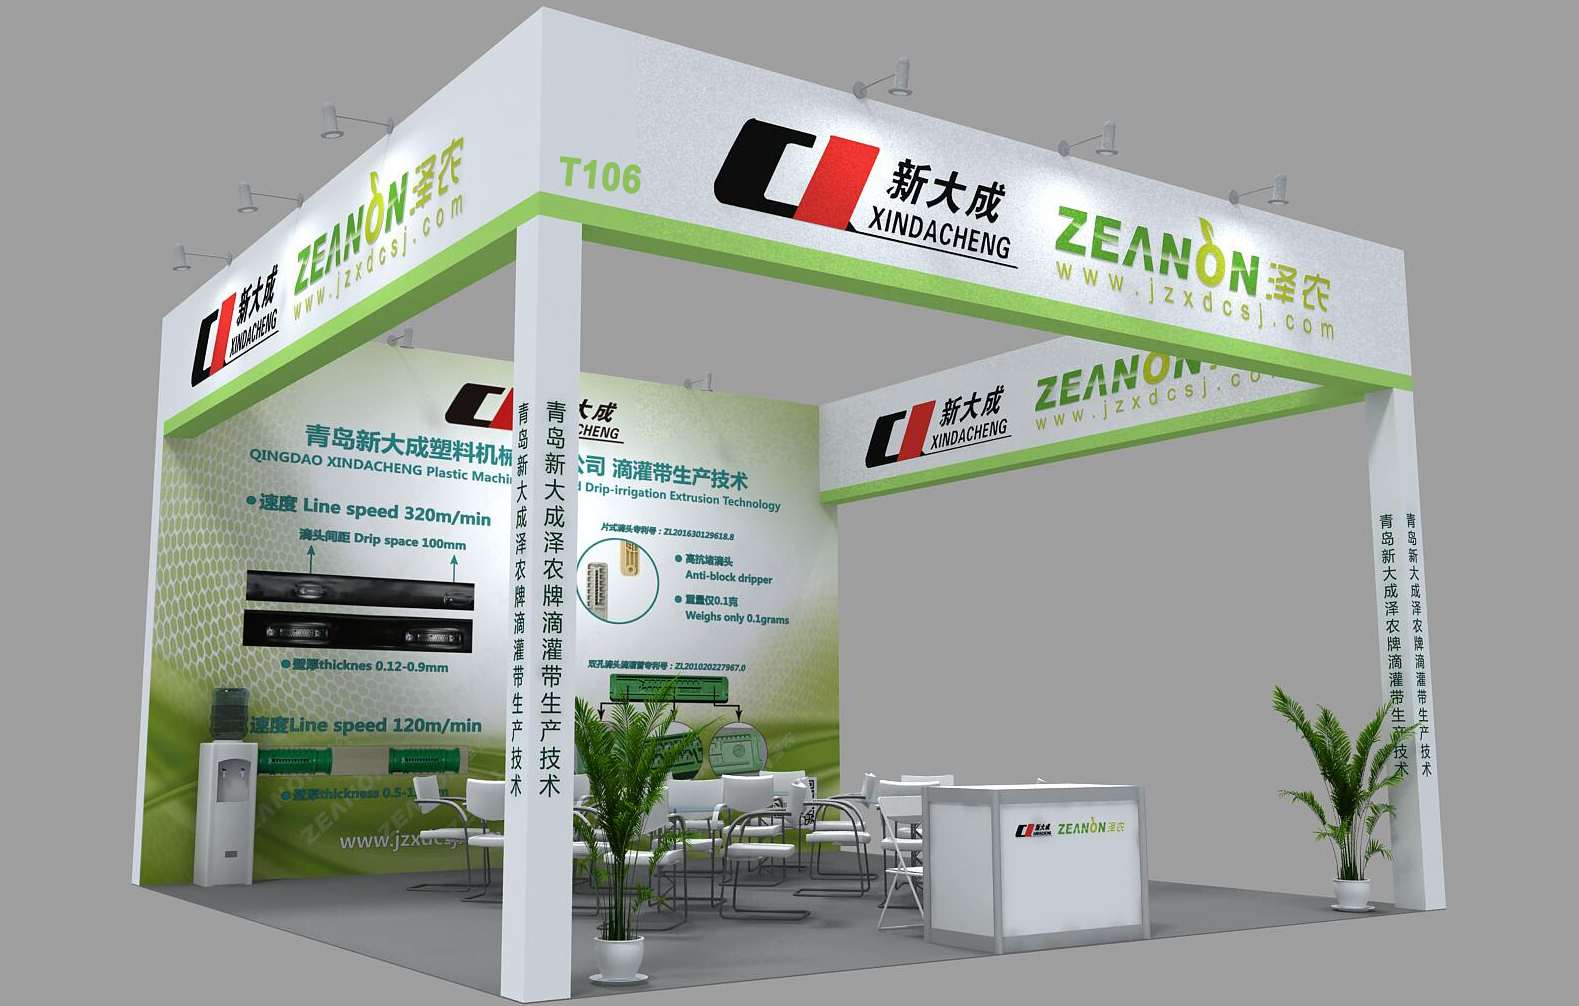 The 8th Beijing Irrigation Exhibition will be held soon